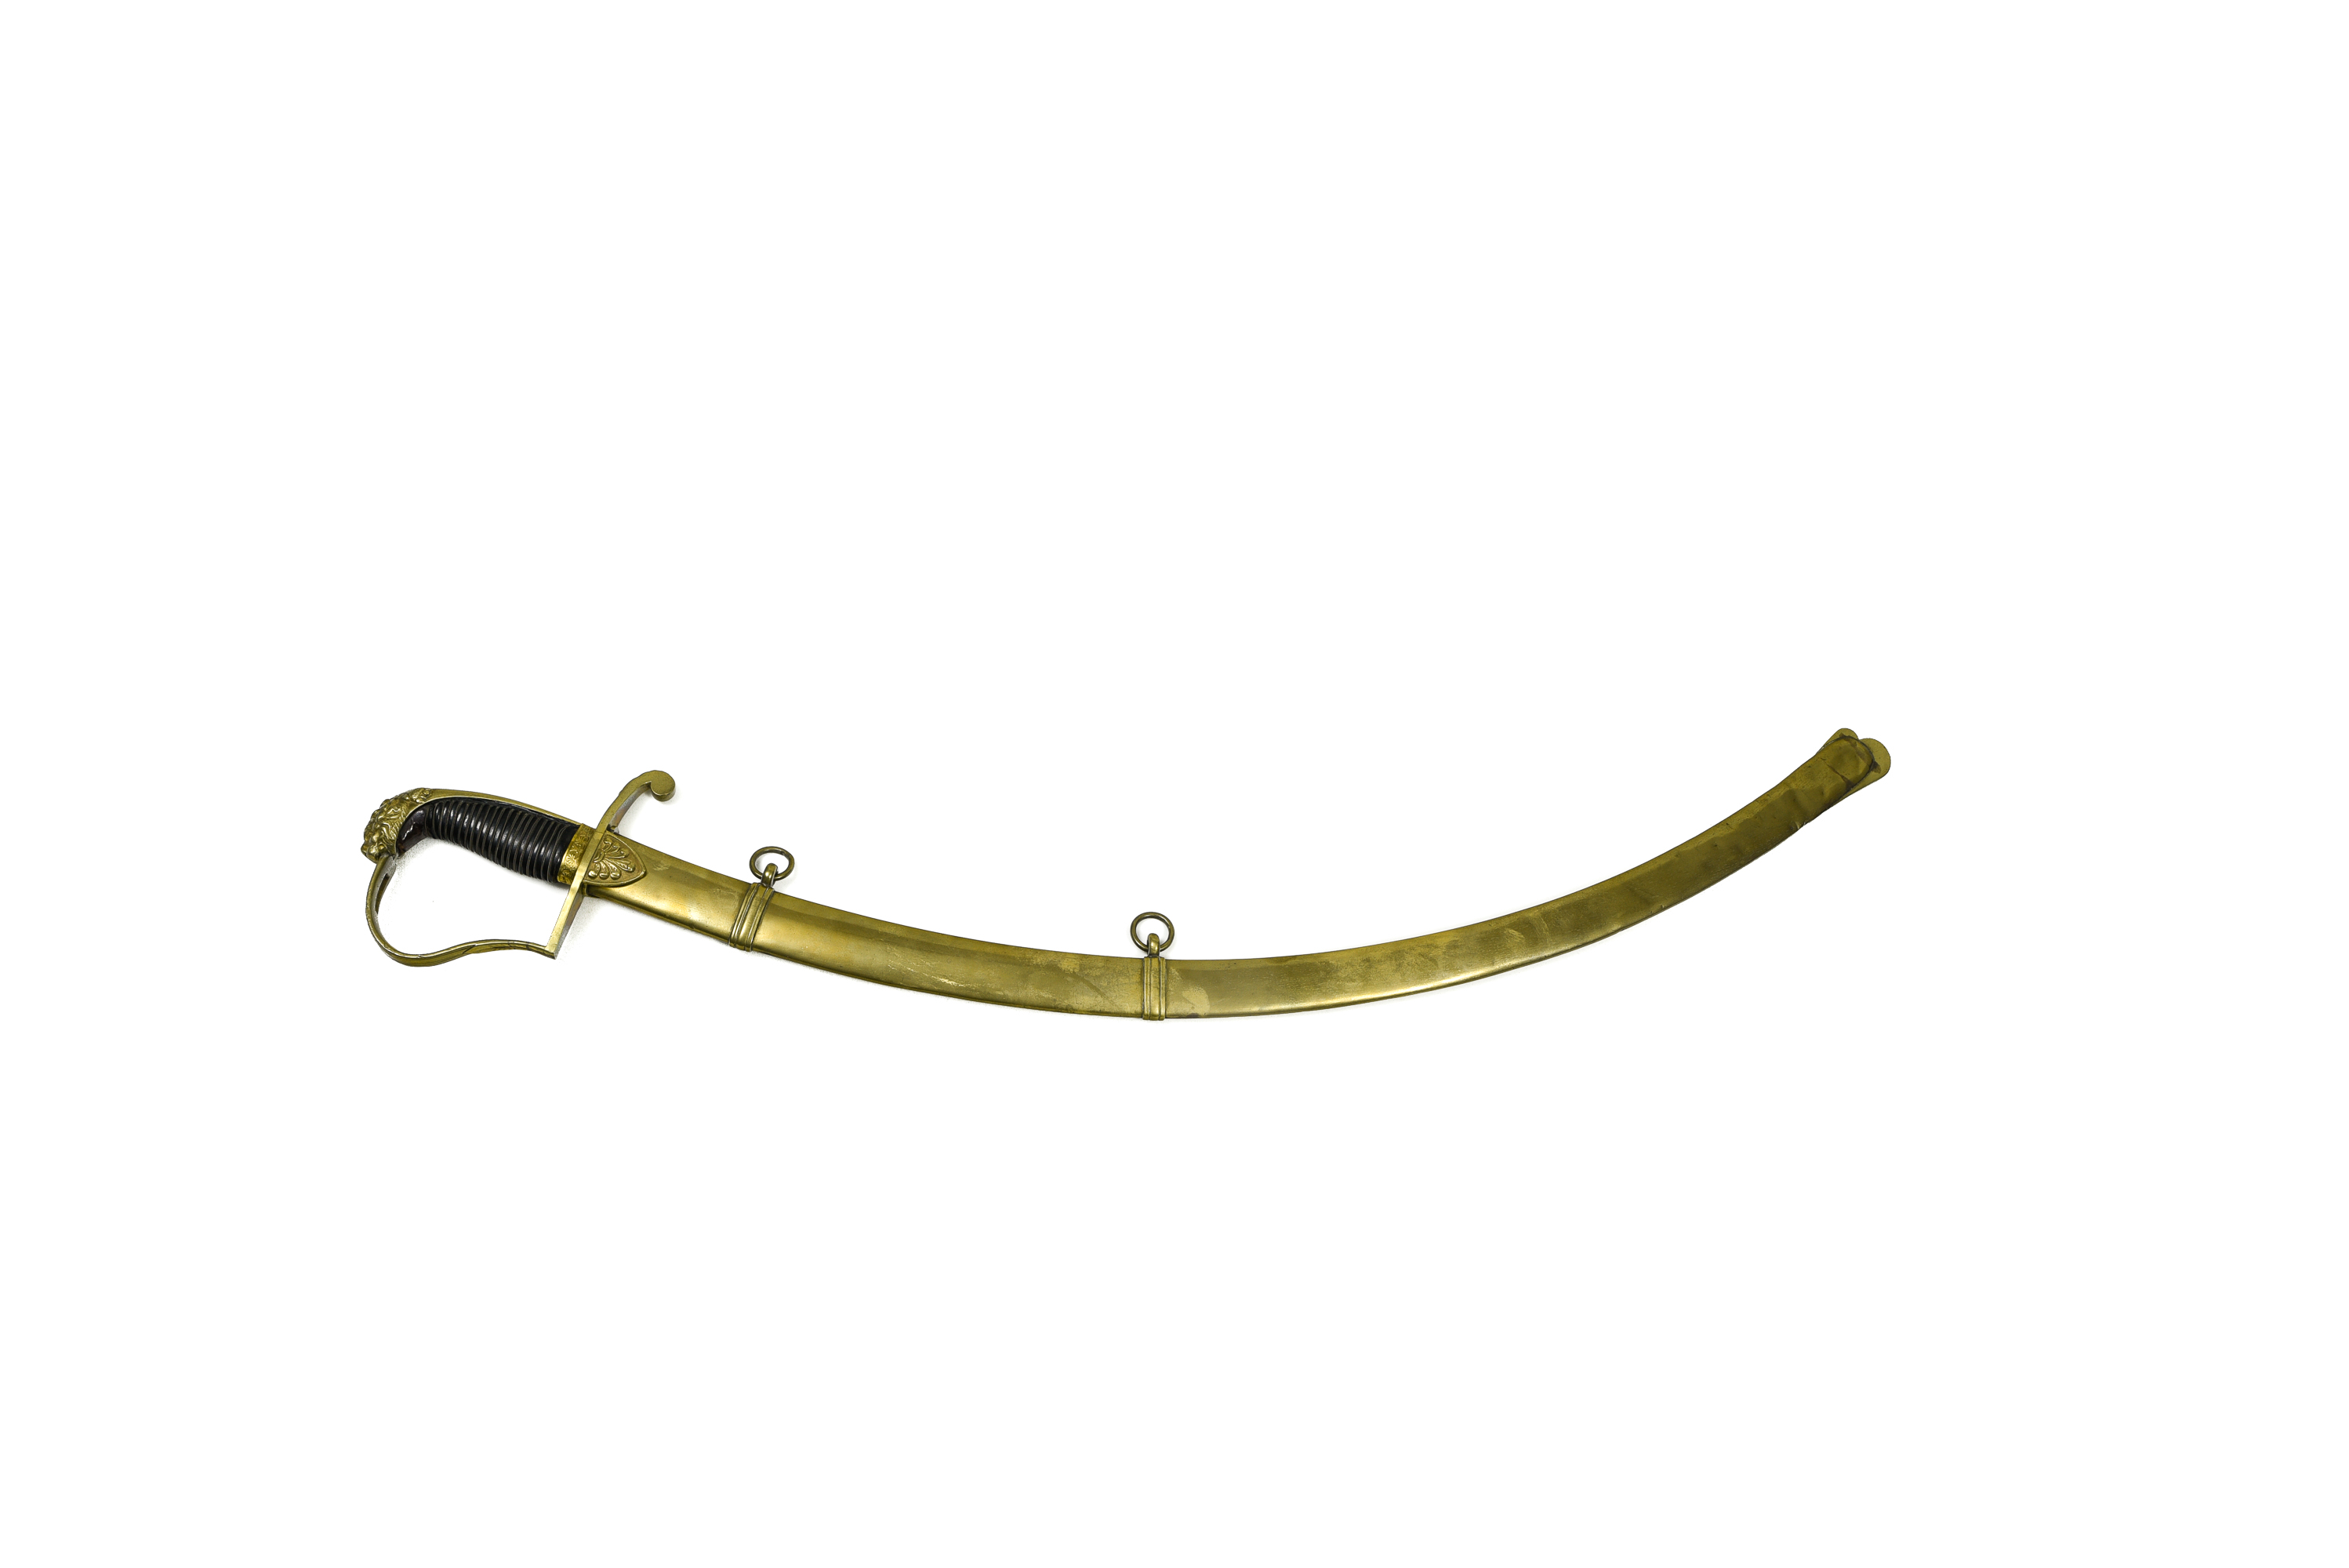 Light cavalry officer's sabre GREAT BRITAIN, EARLY 19TH CENTURY With its scabbard. - Image 3 of 3